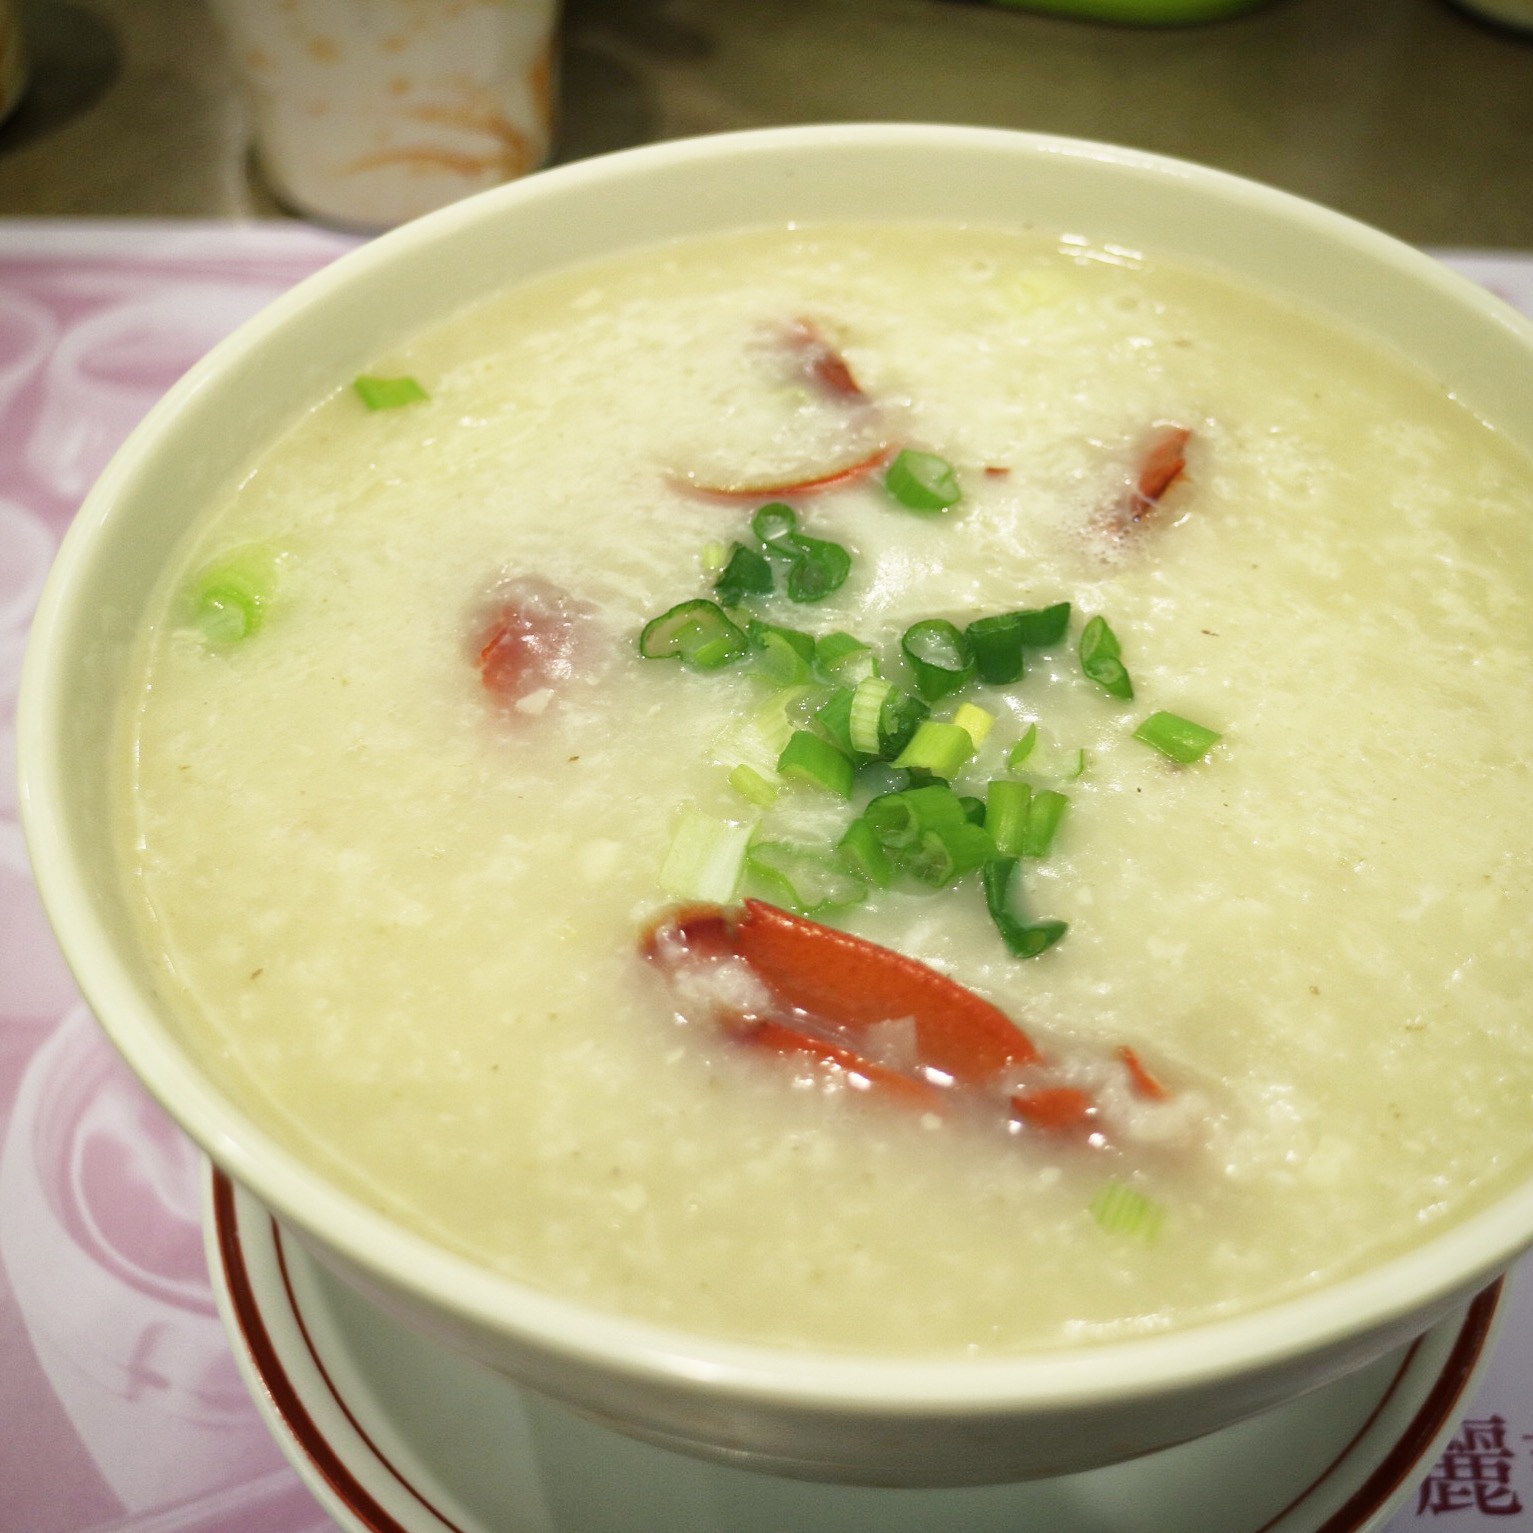 Lobster Tail Congee